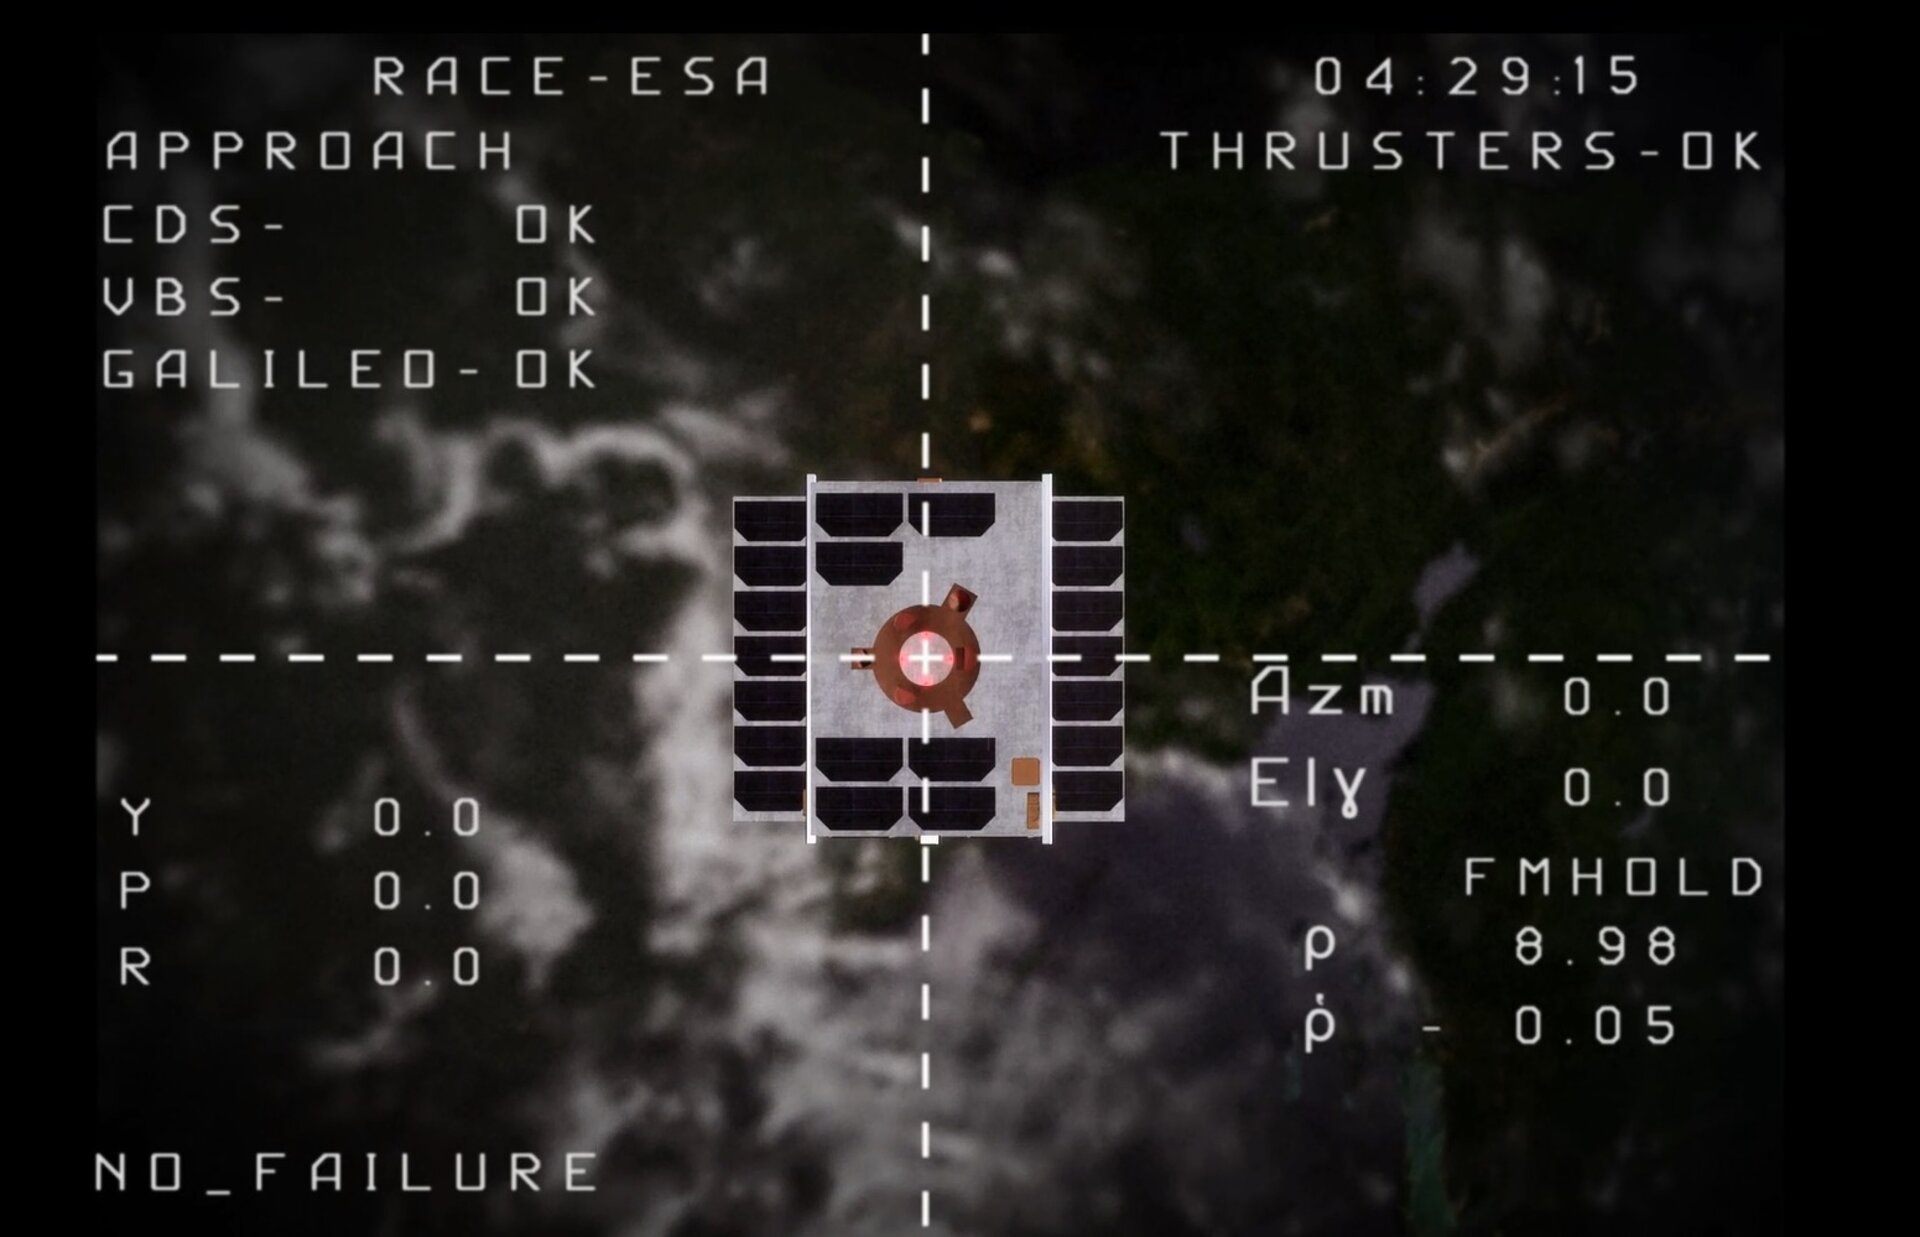 Lining up for CubeSat docking